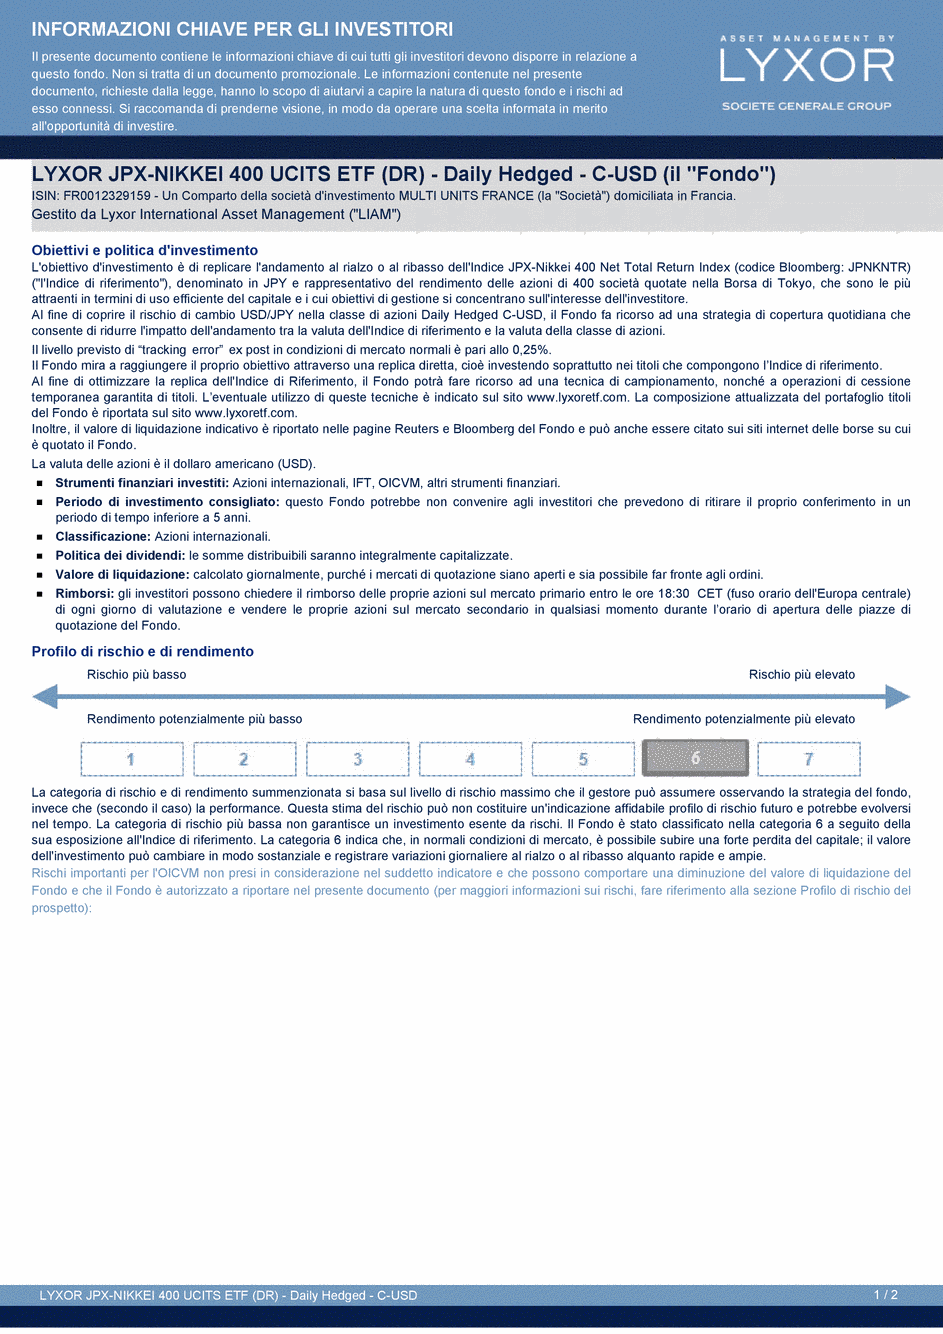 DICI LYXOR JPX-NIKKEI 400 UCITS ETF (DR) Daily Hedged C-USD - 20/08/2015 - Italien